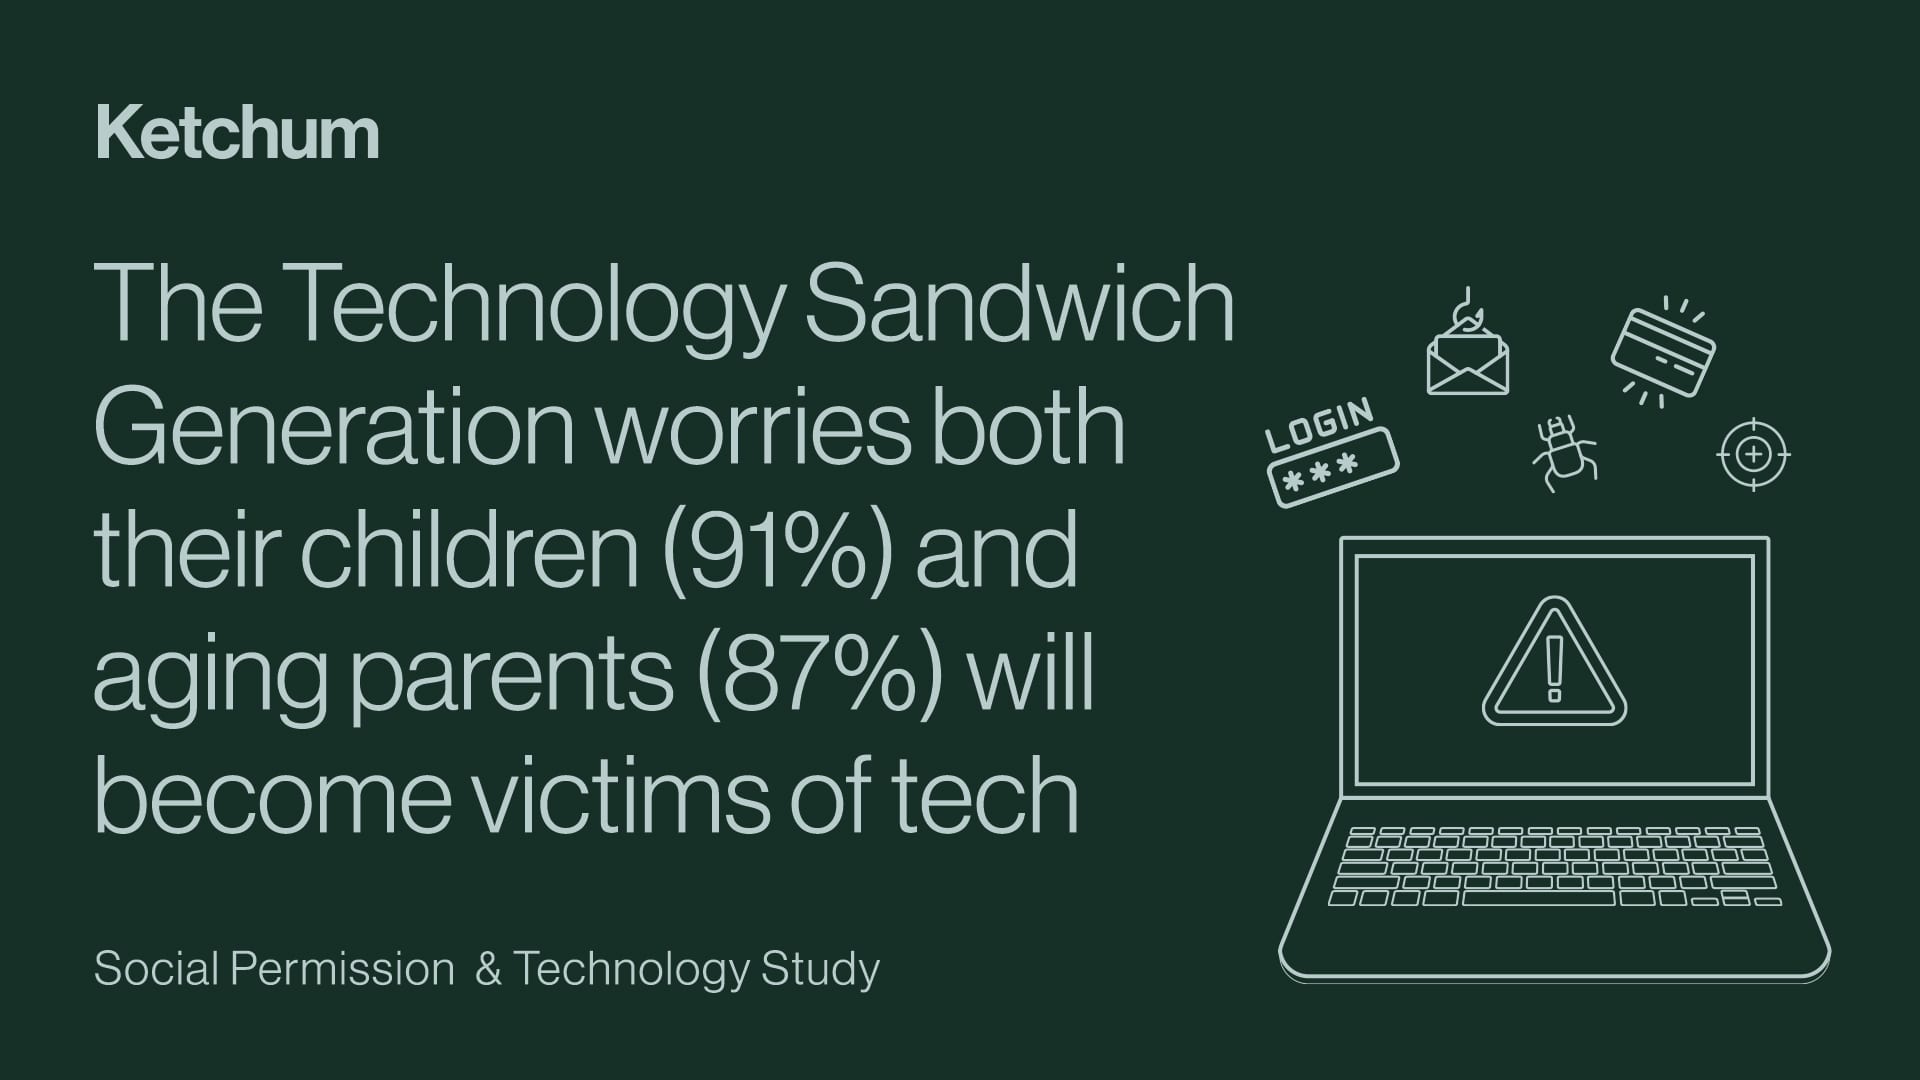 Caught in the Middle: ‘Technology Sandwich Generation’ Stresses Over Both Kids’ and Aging Parents’ Data Security and Well Being